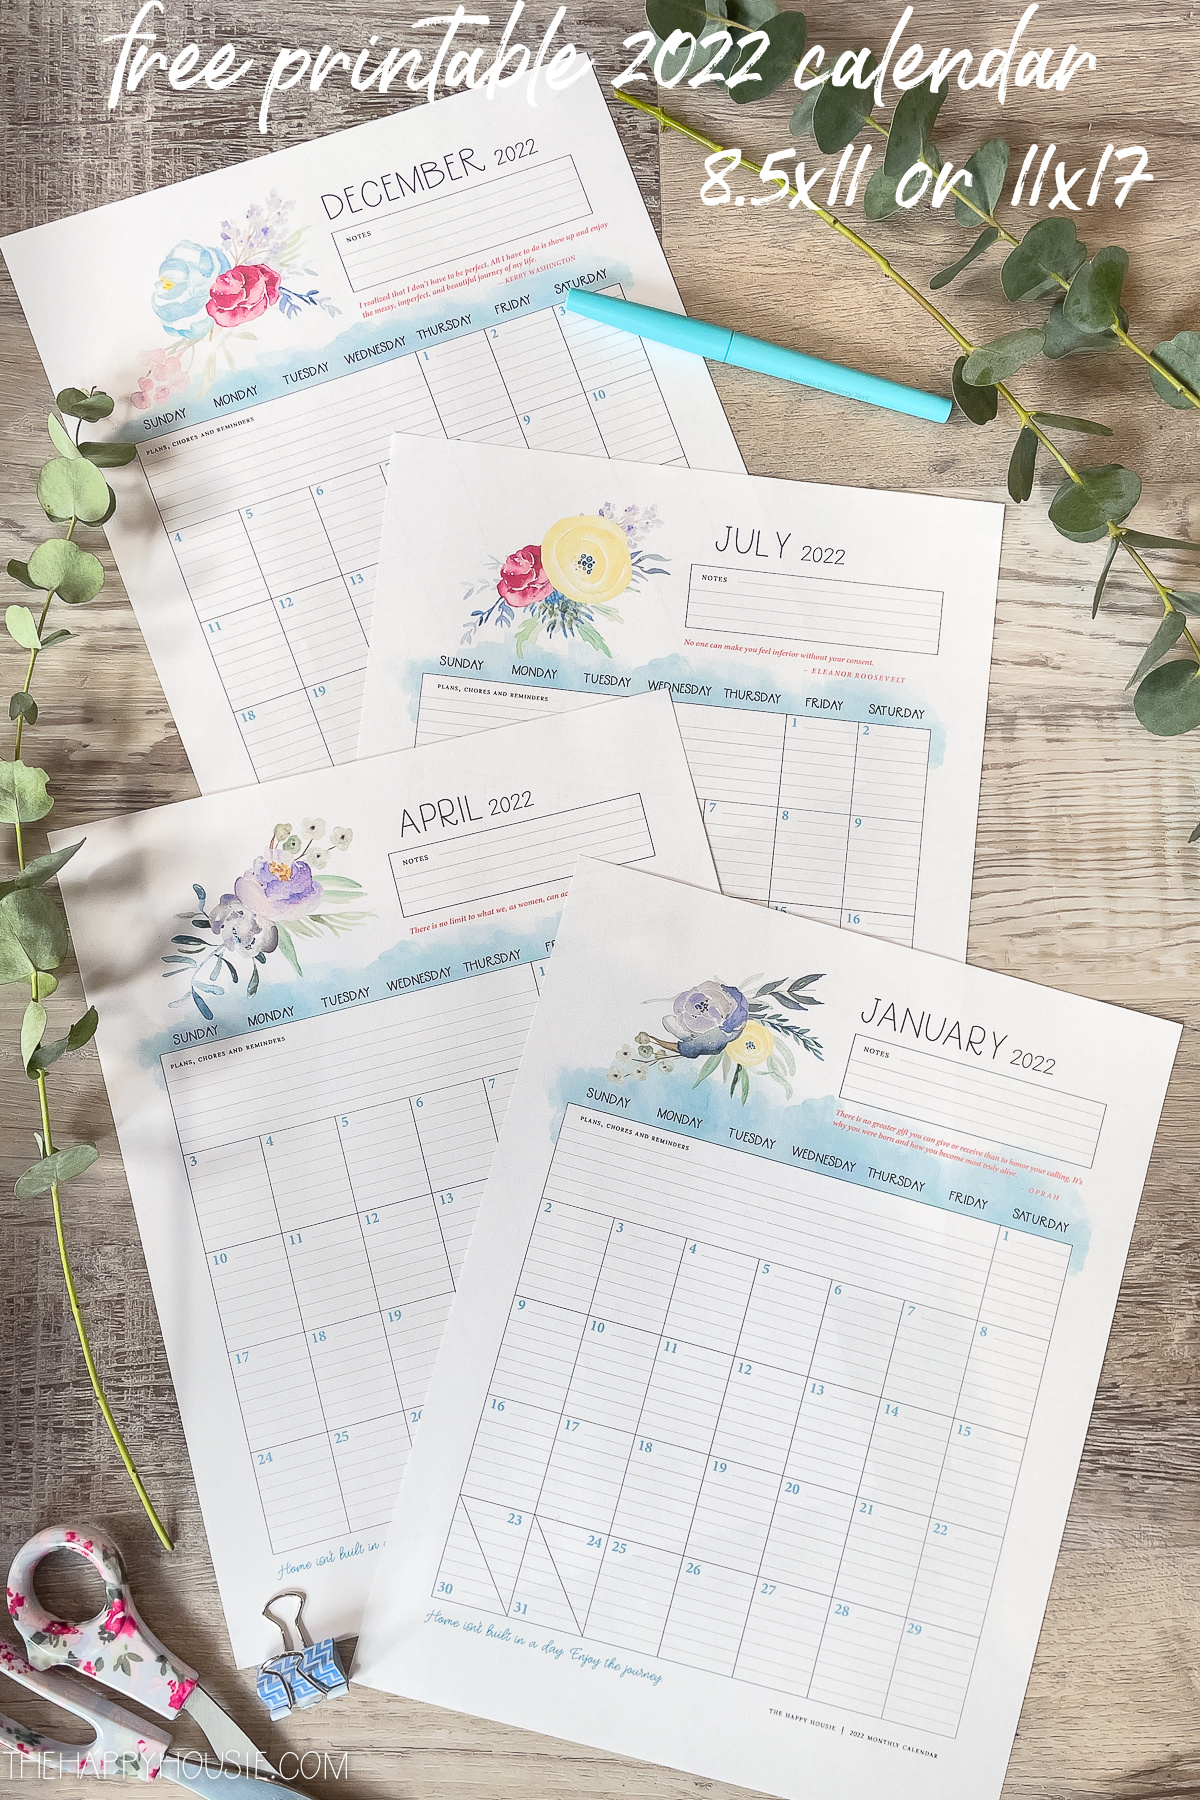 picture of the pages of a free printable family planner calendar